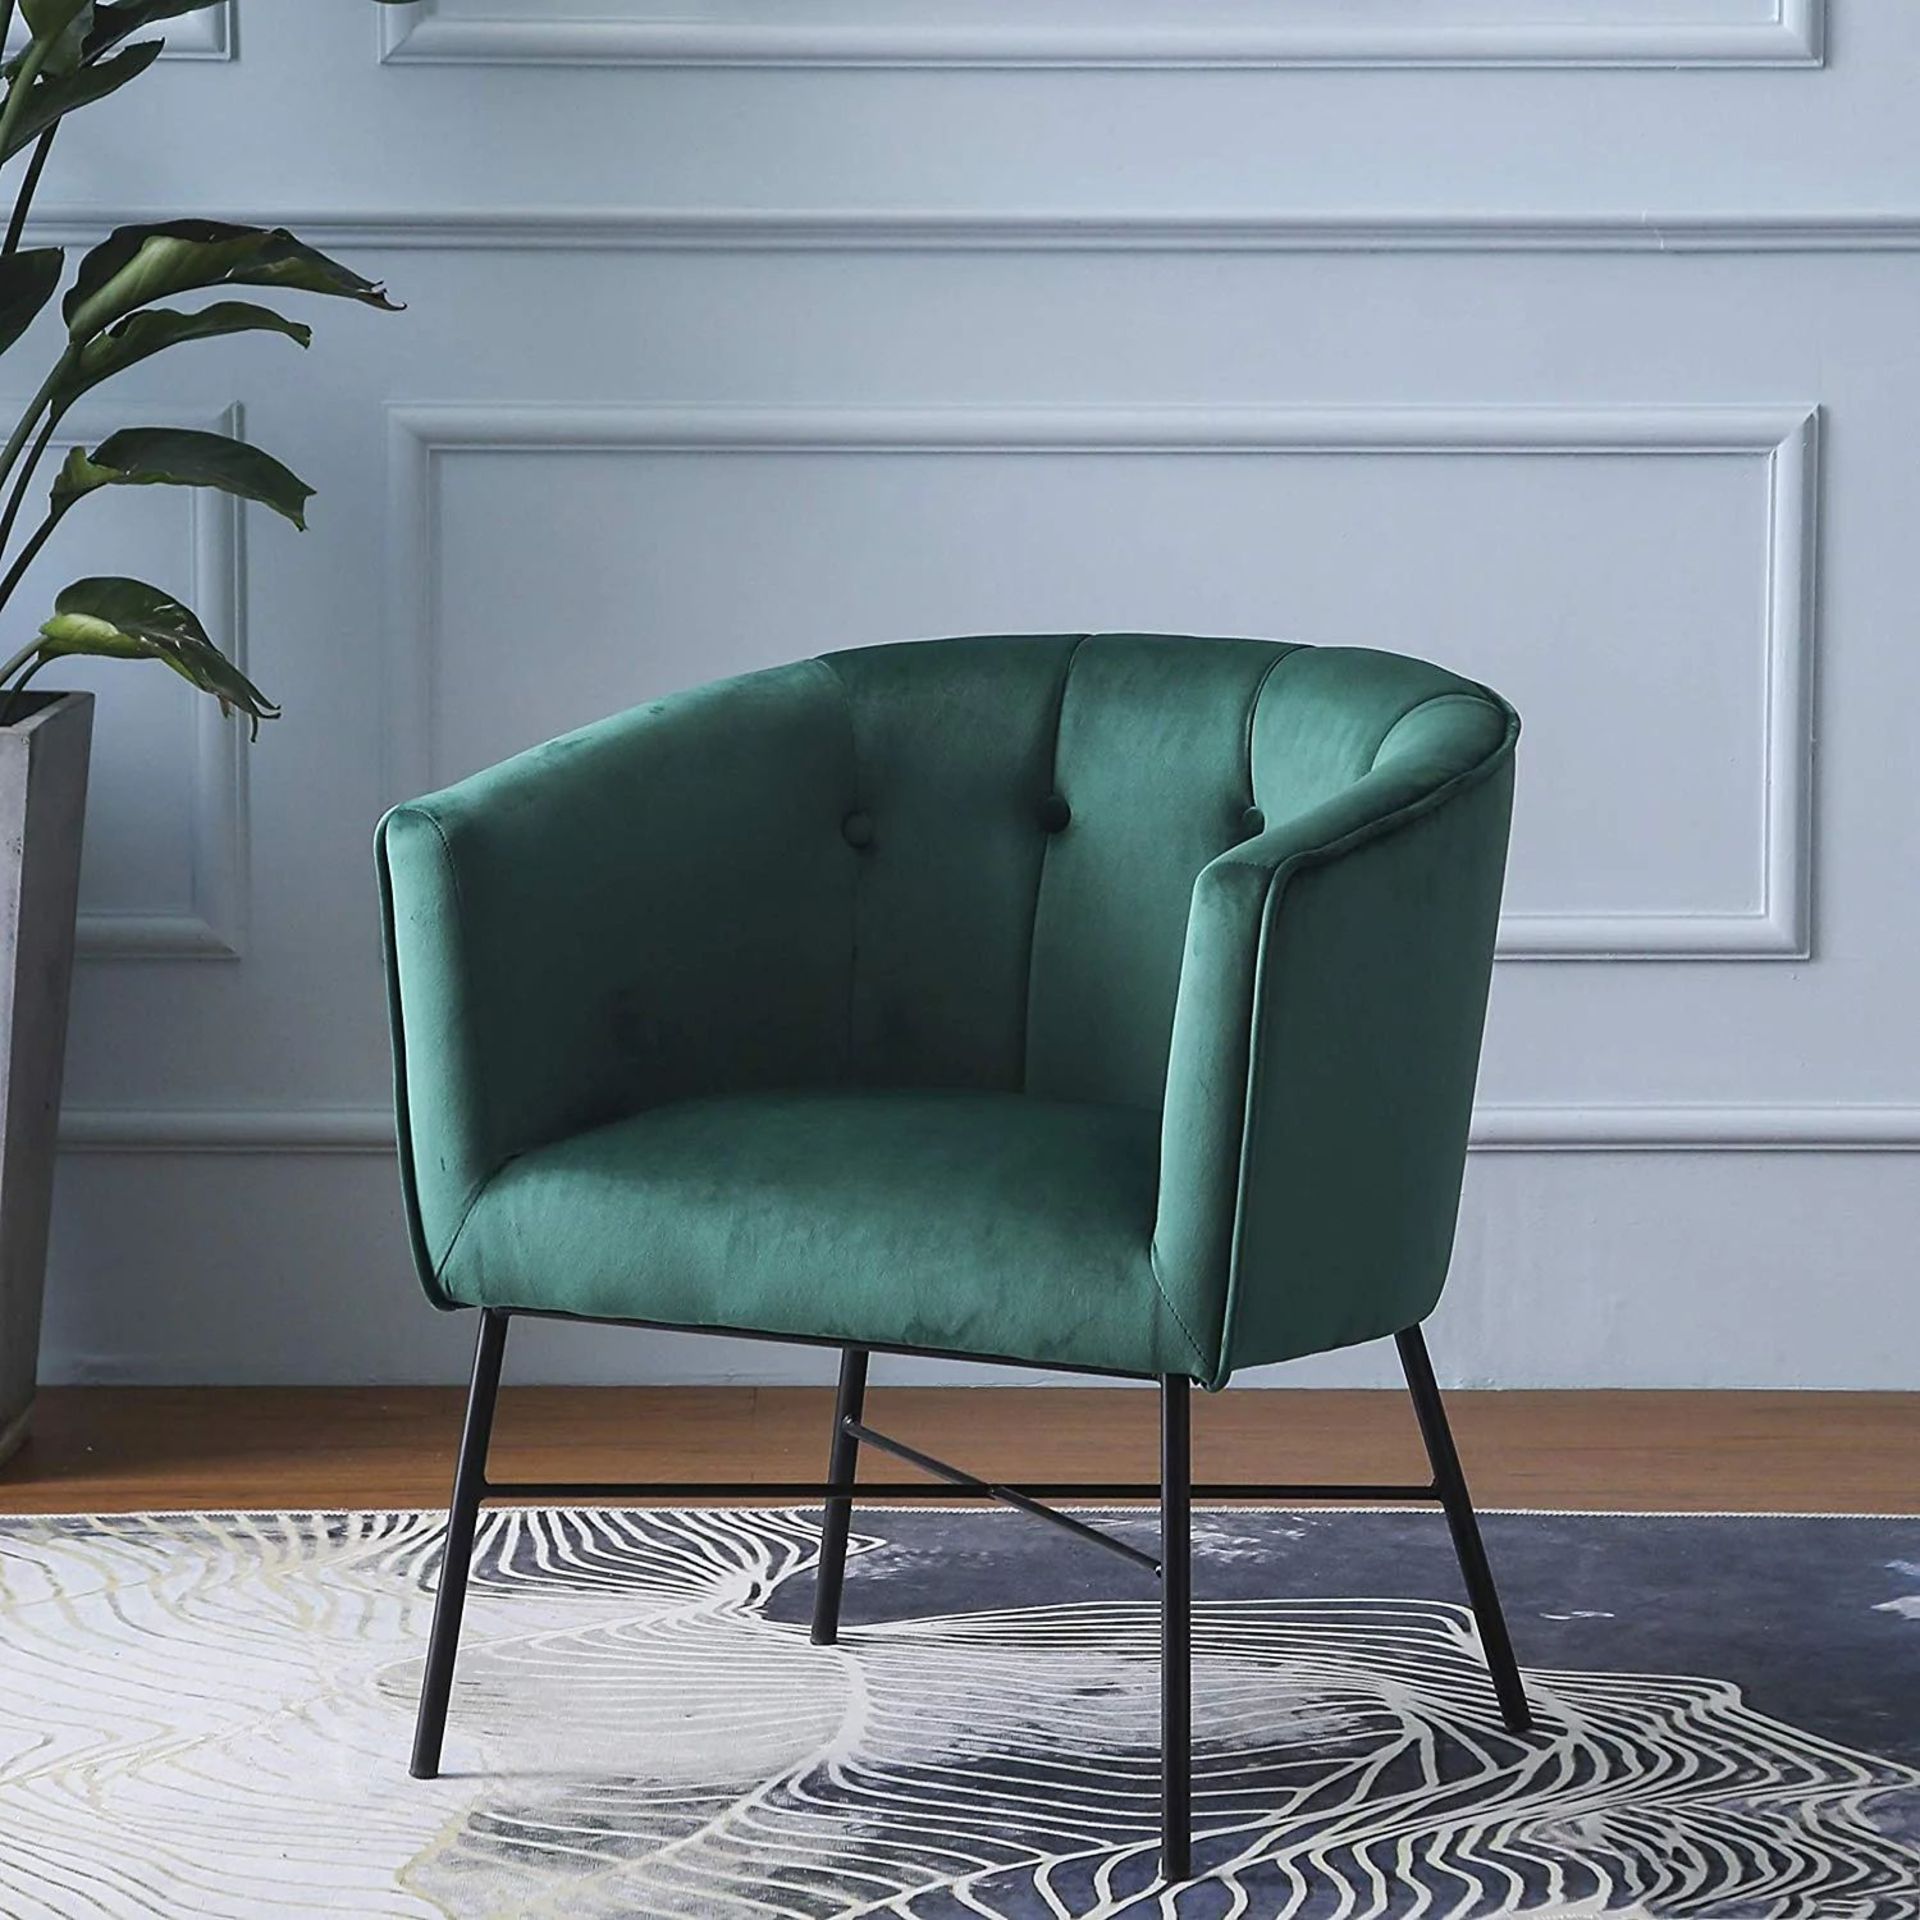 Aurelie Tub Chair in Emerald Green Velvet. - R14. RRP £239.99. With buttoned backrest and body